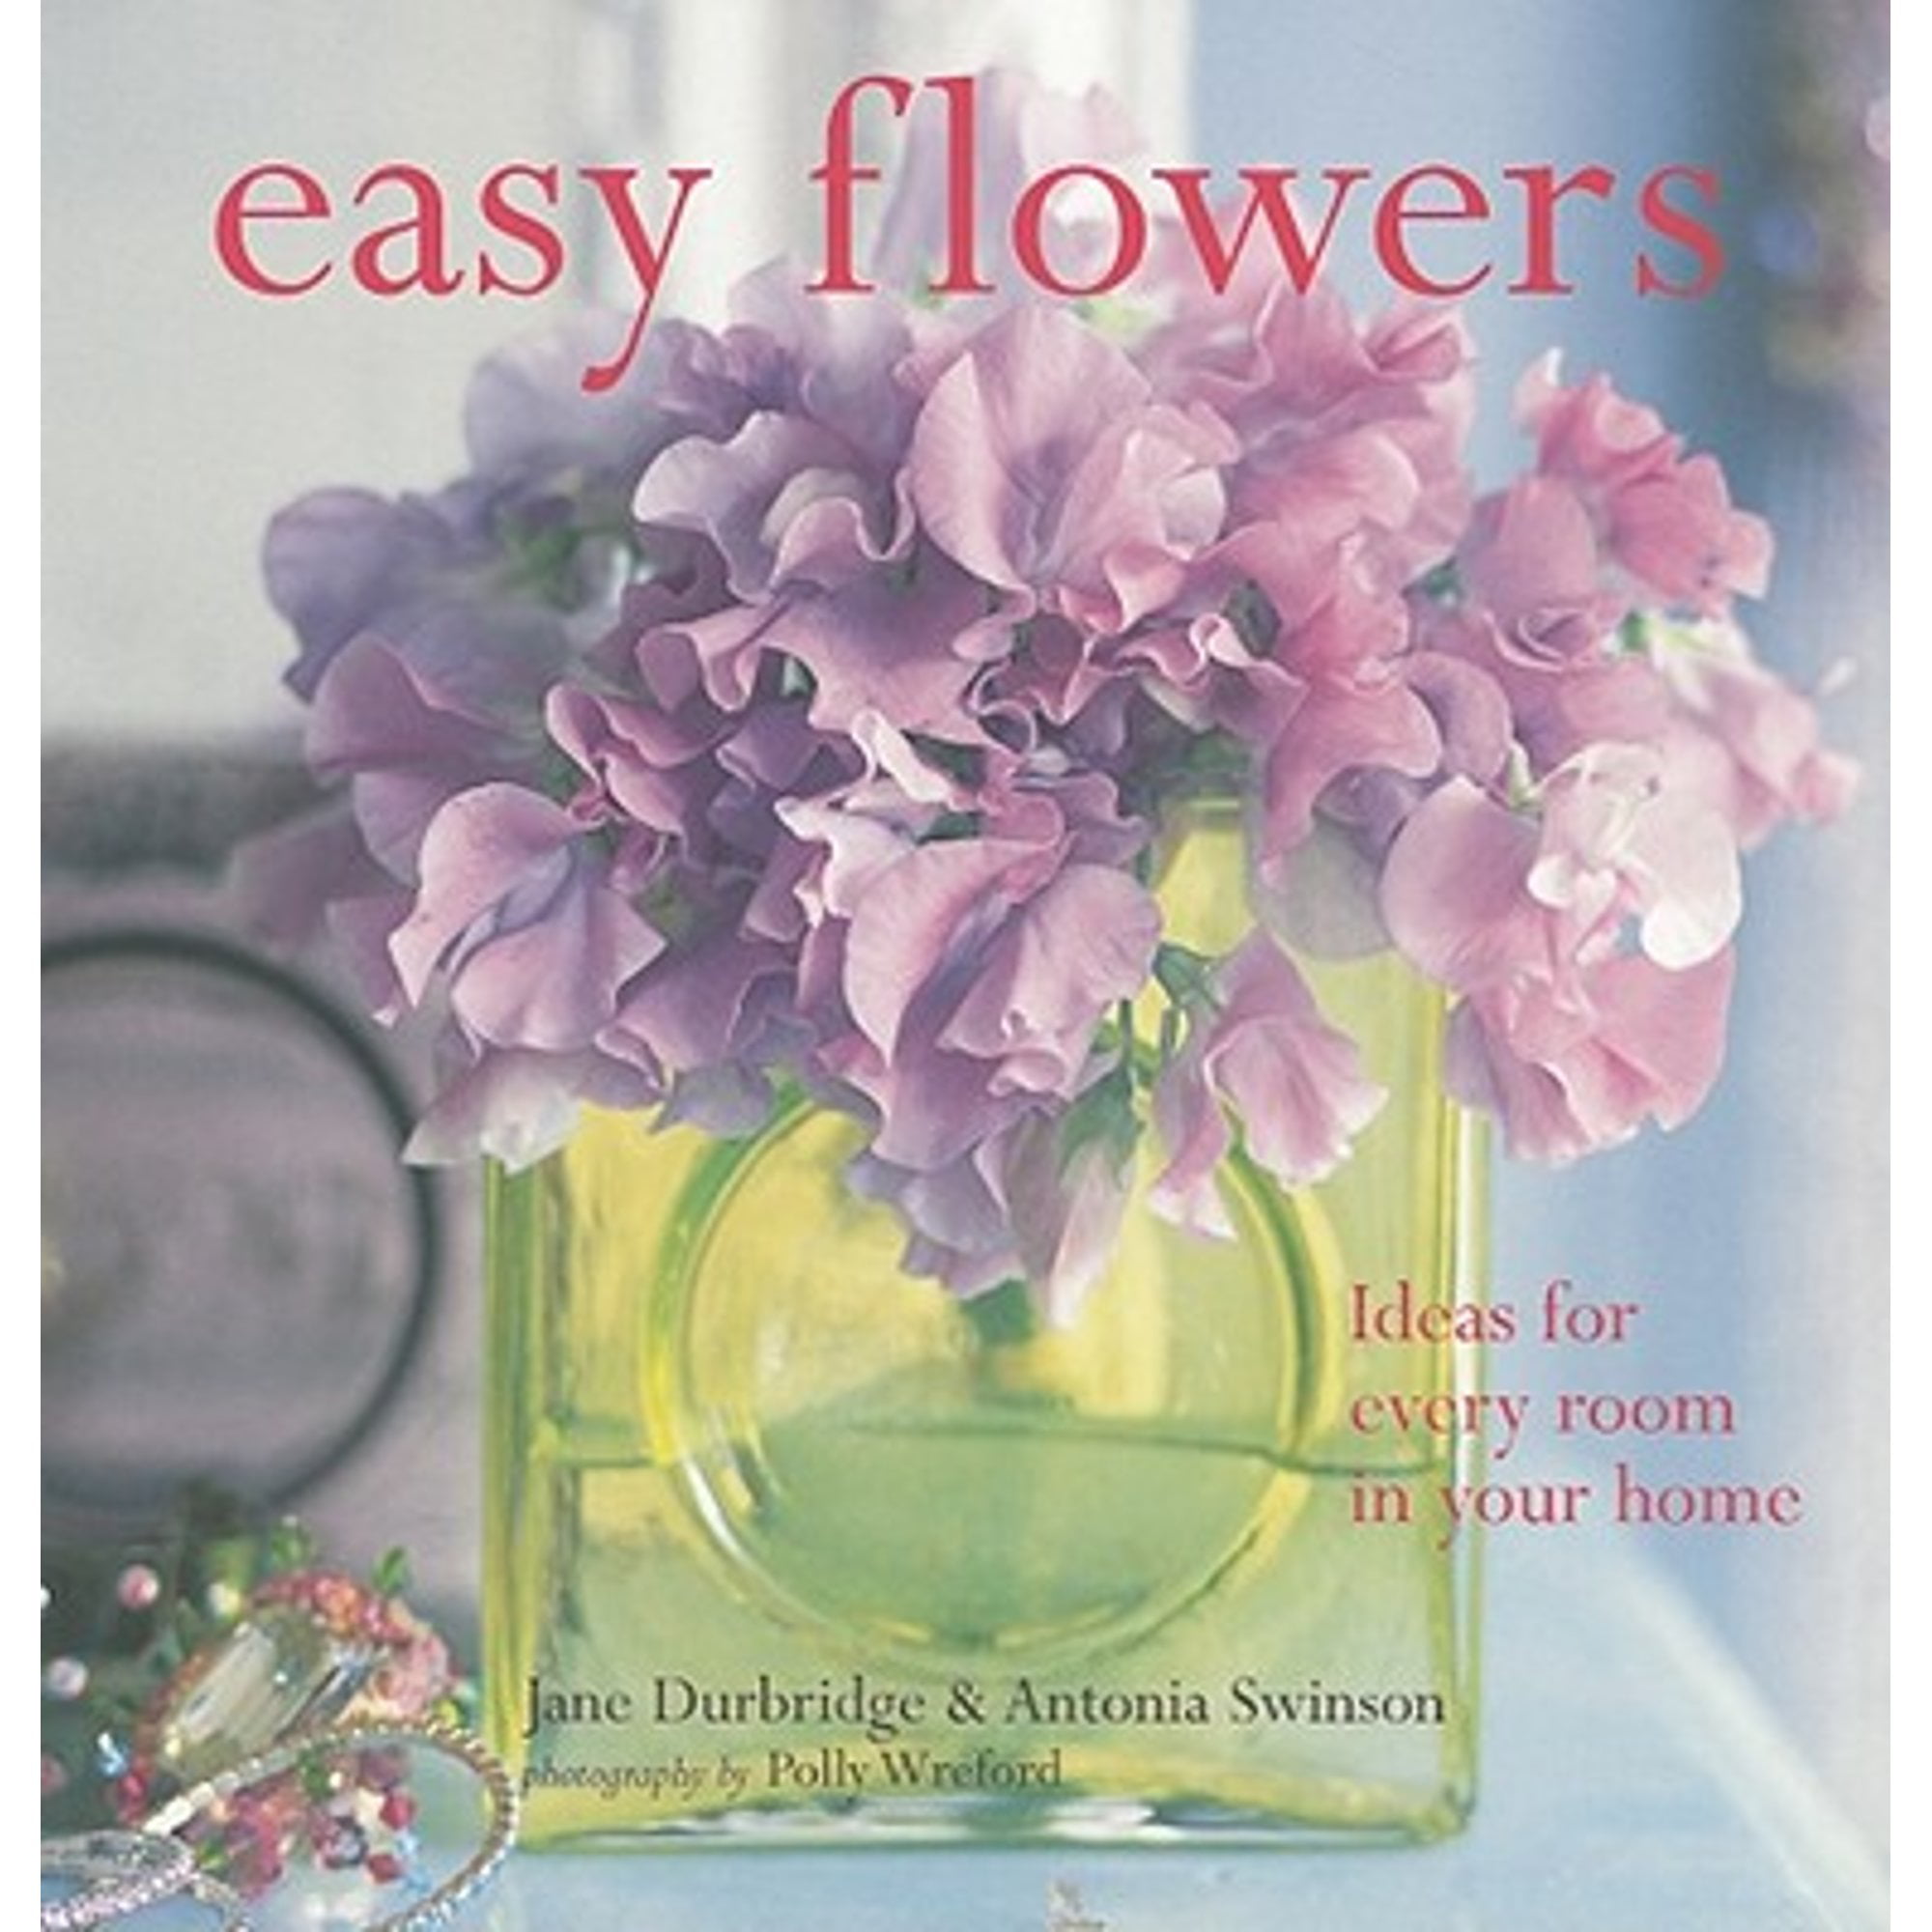 Flowers:　9781845979850)　Swinson,　by　Polly　Antonia　Durbridge,　Jane　Pre-Owned　(Paperback　Ideas　Every　Home　Your　in　Room　for　Easy　Wreford